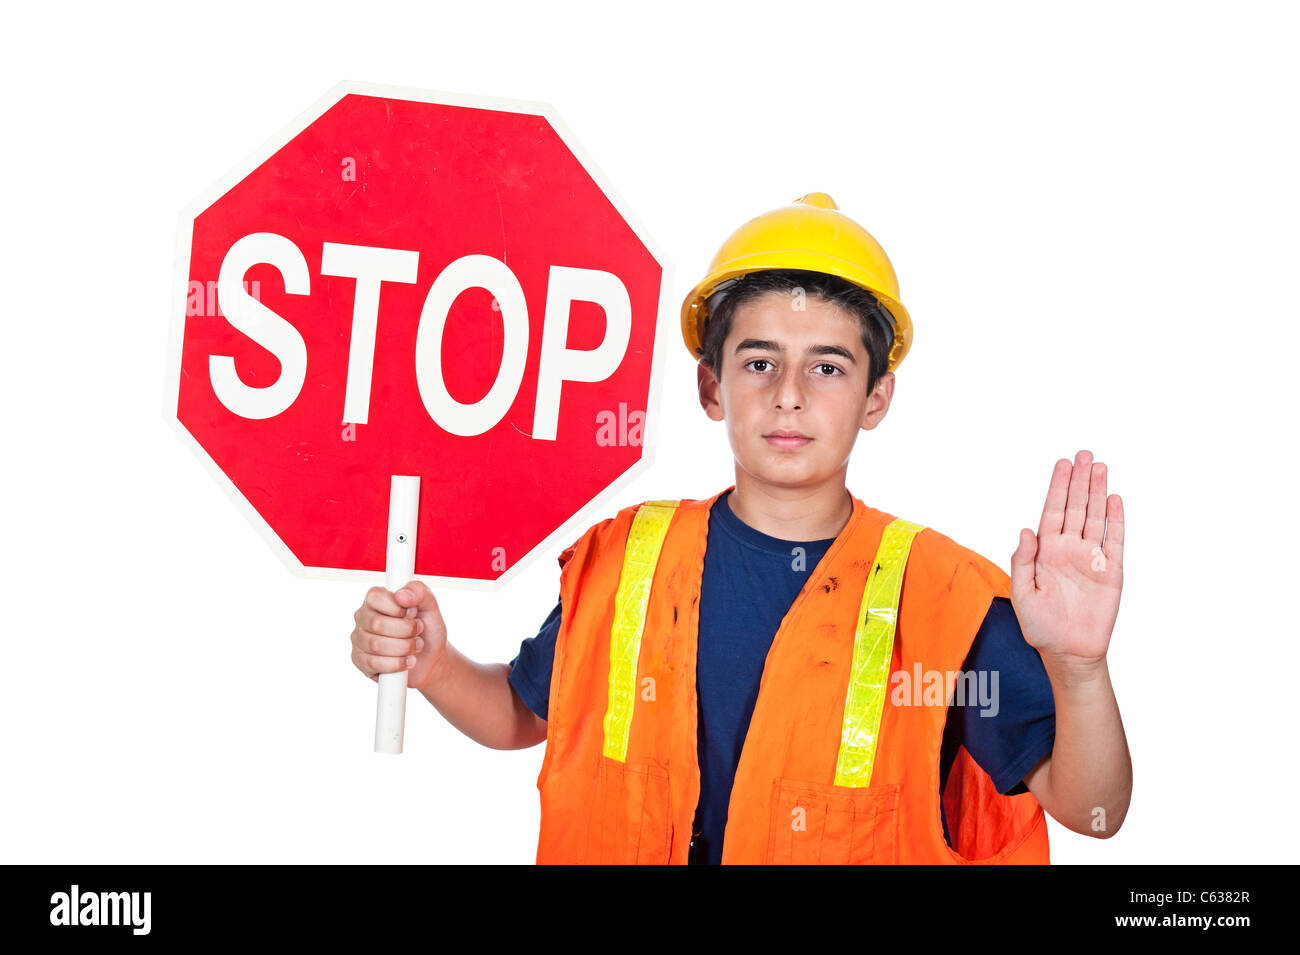 A young man holds up a stop sign together with a hand signal to stop. Stock Photo